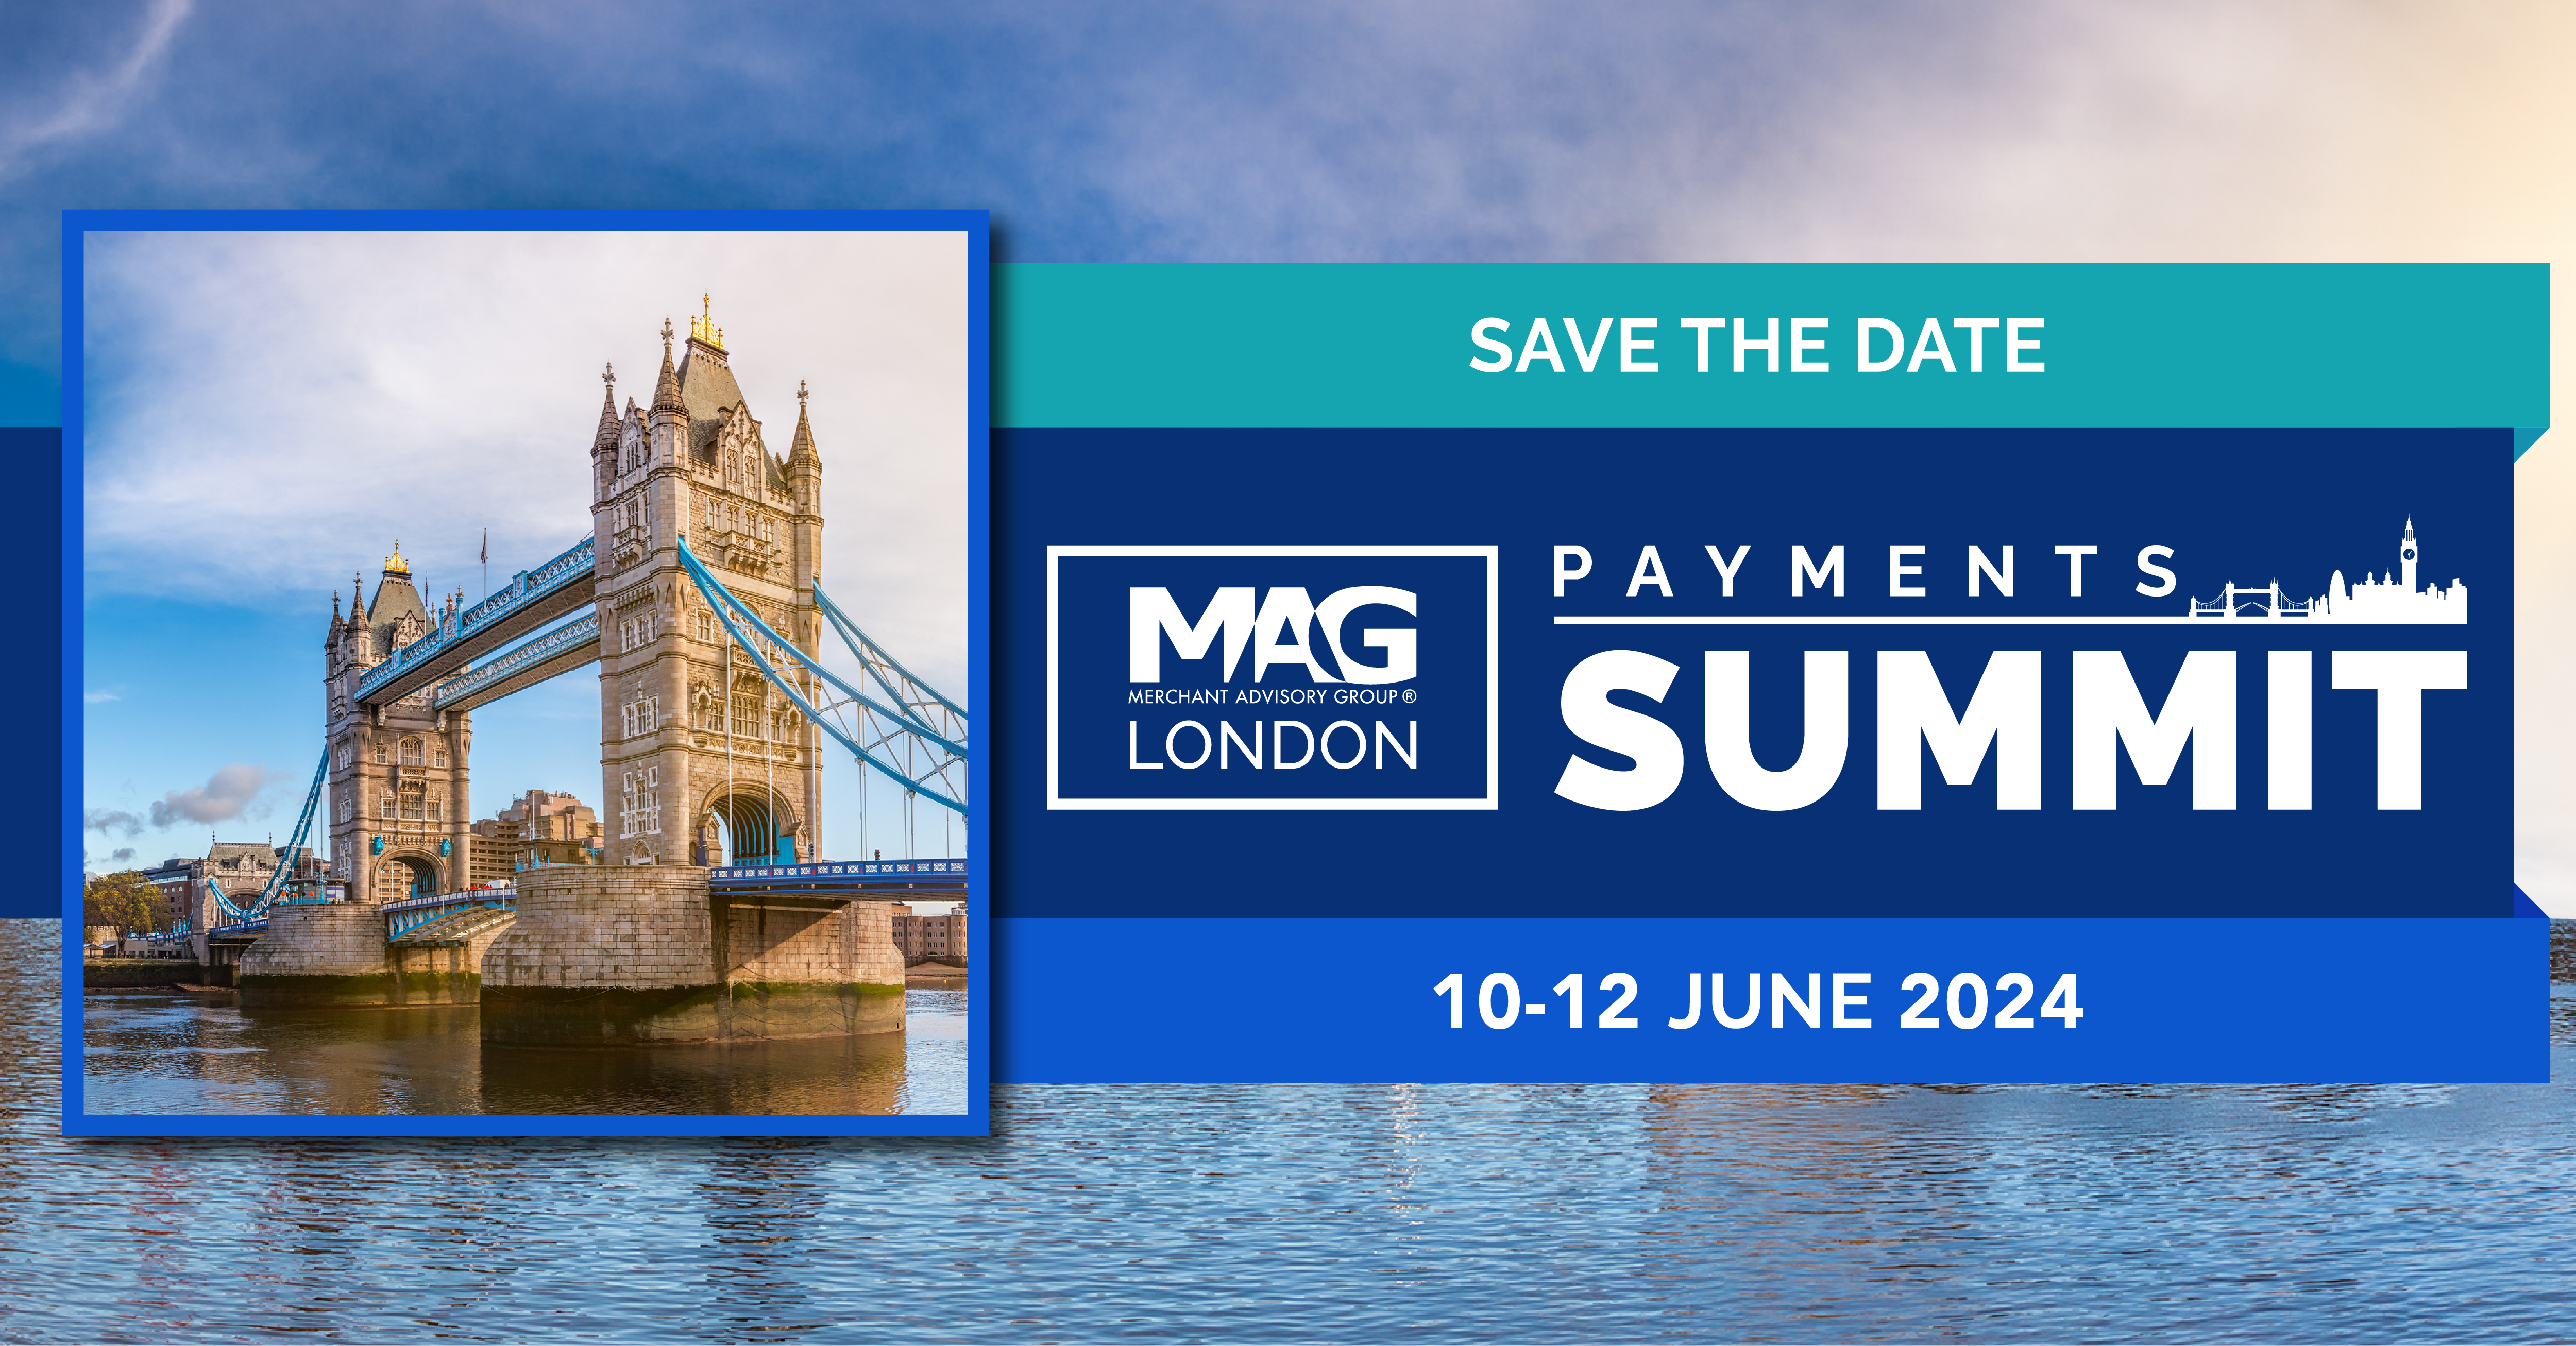 Save the Date MAG Payments Summit London 10 through 12 June 2024